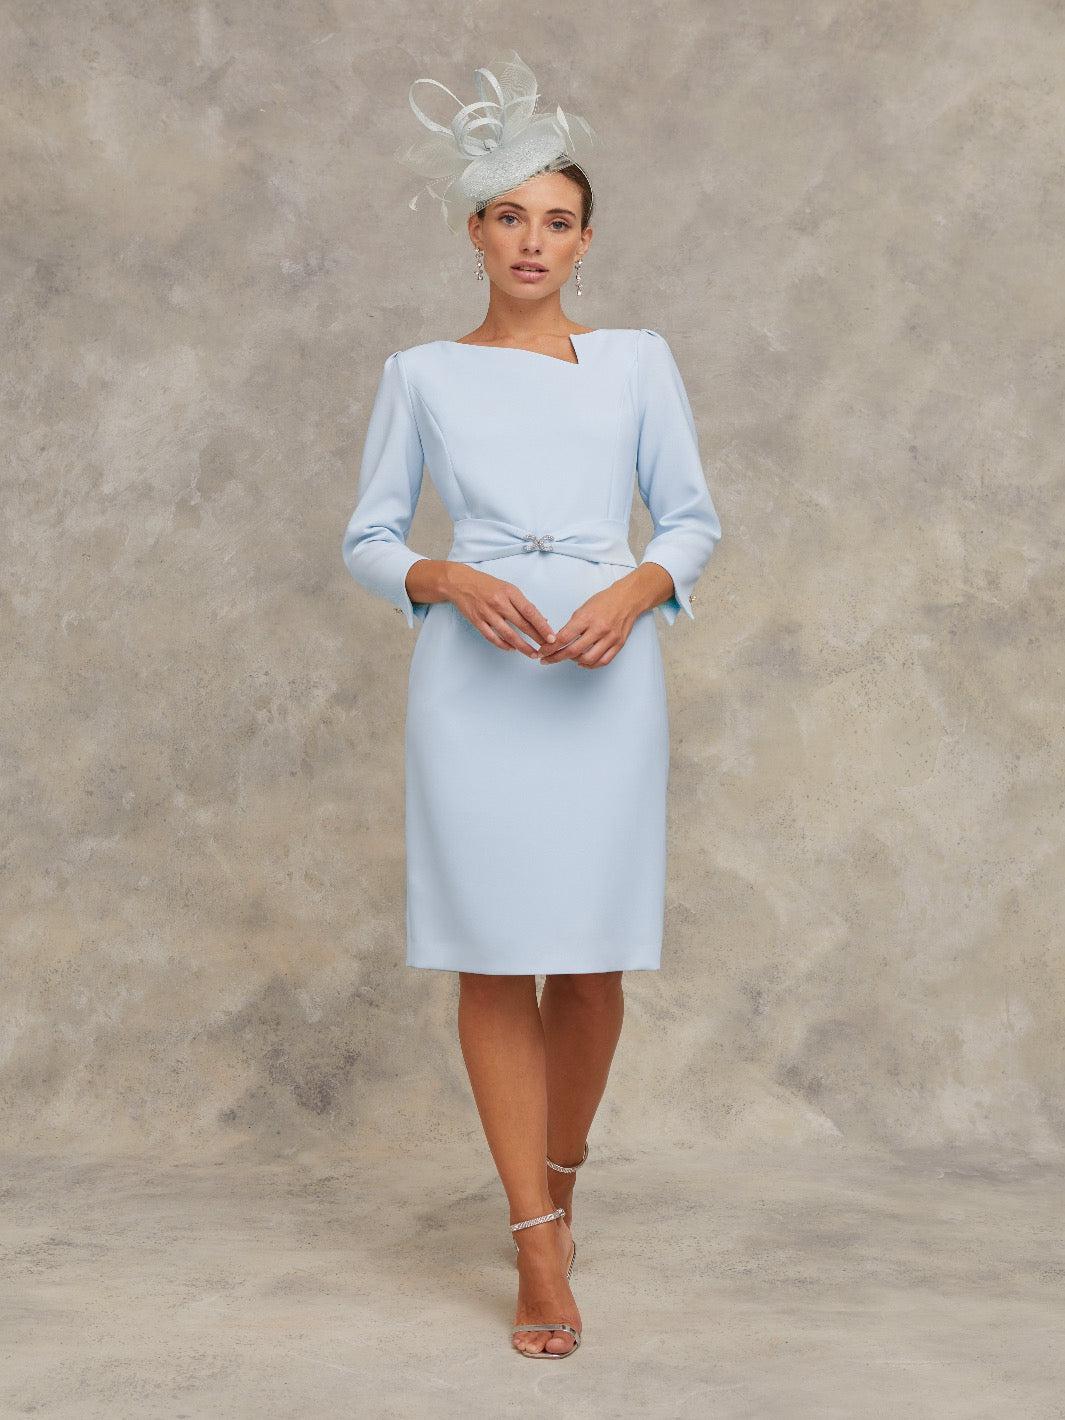 Claudia C Dress Riesling In Light Blue-Mother of the bride- mother of the groom -Nicola Ross